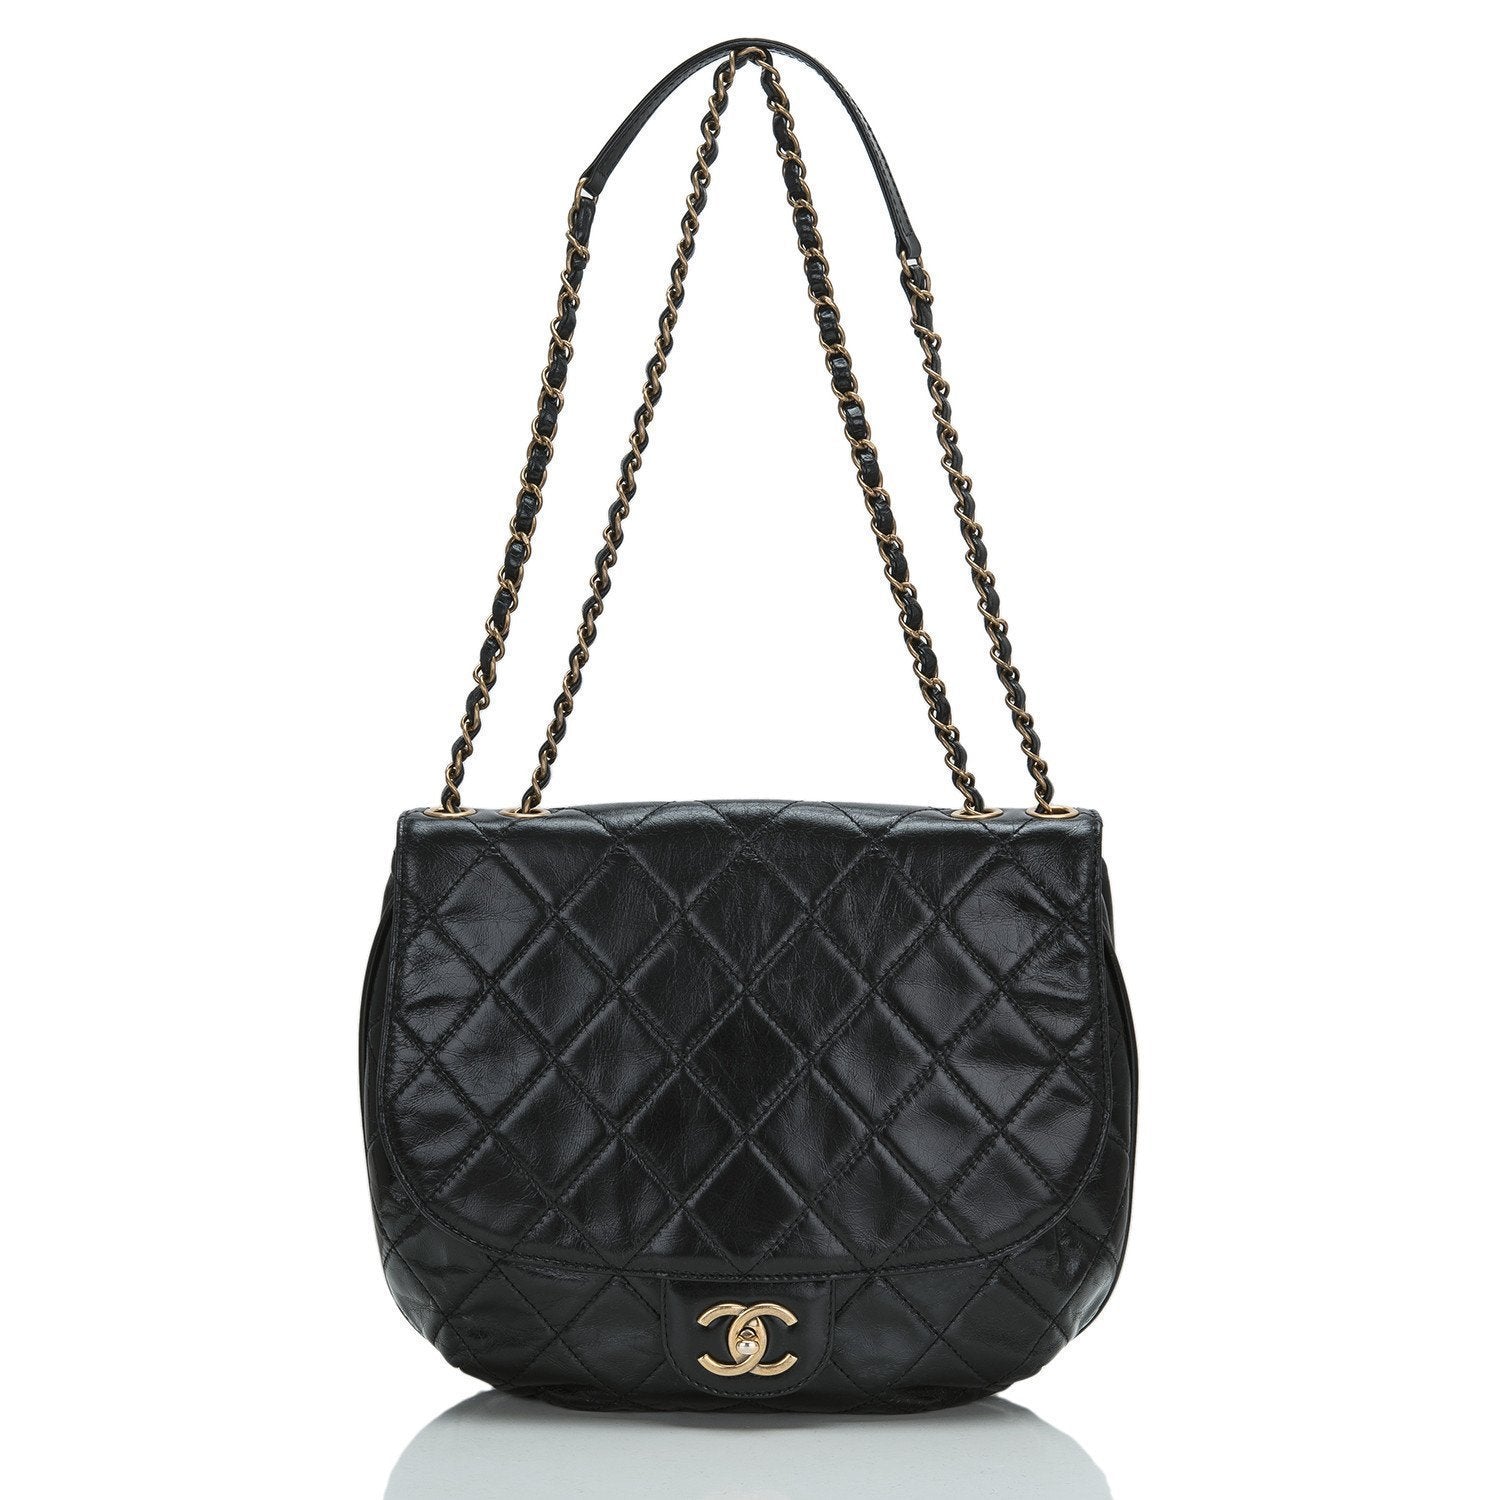 Chanel Large Black Quilted Aged Calfskin Flap Messenger Bag (Preloved – Madison Avenue Couture